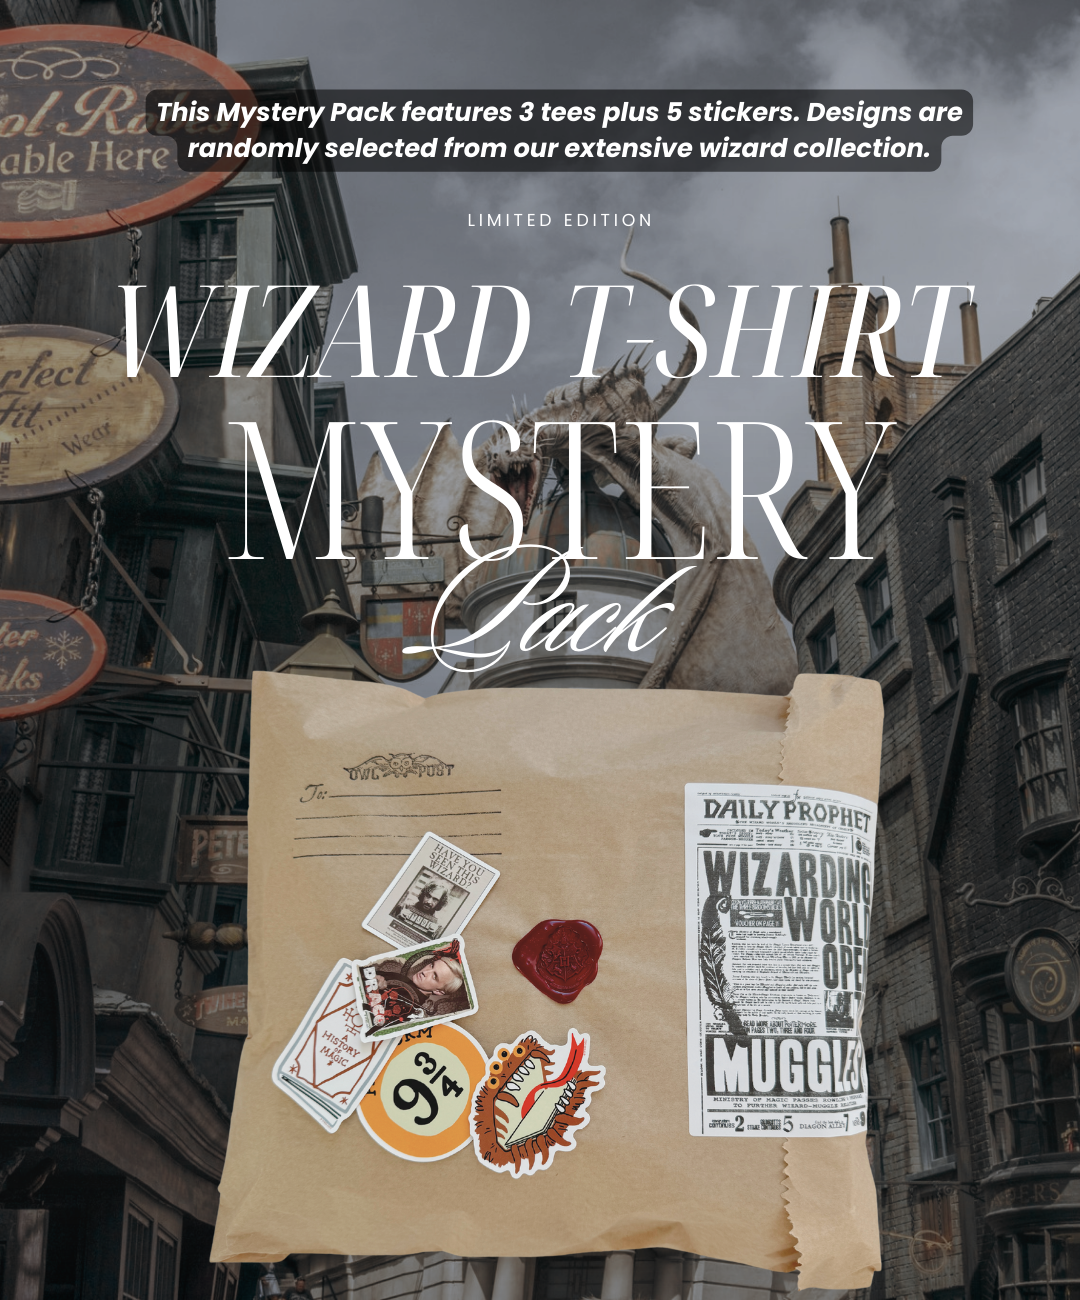 Wizard T-shirt Mystery Pack